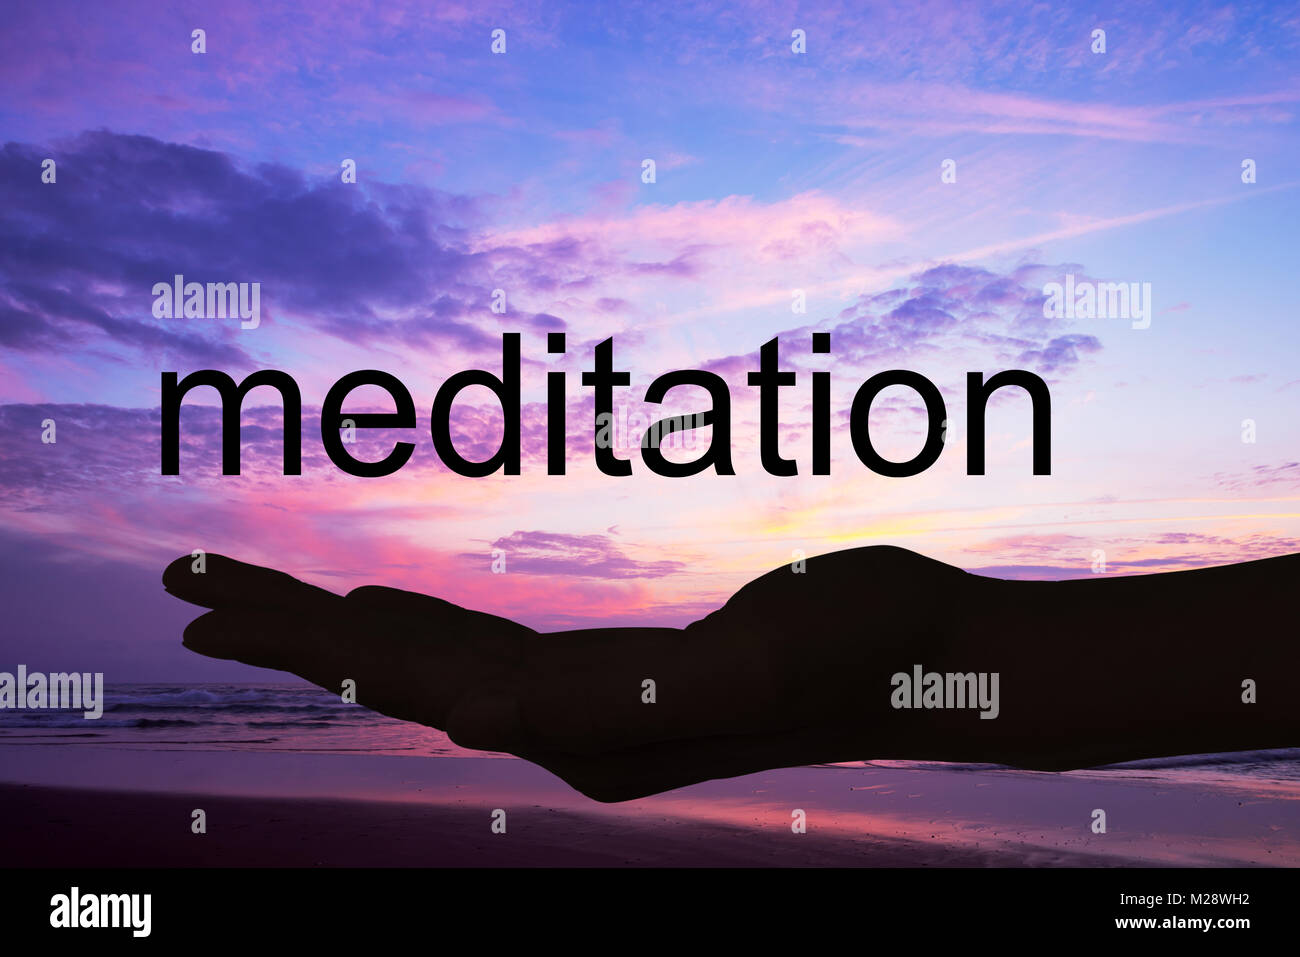 Hand offering the word meditation, sunset background Stock Photo